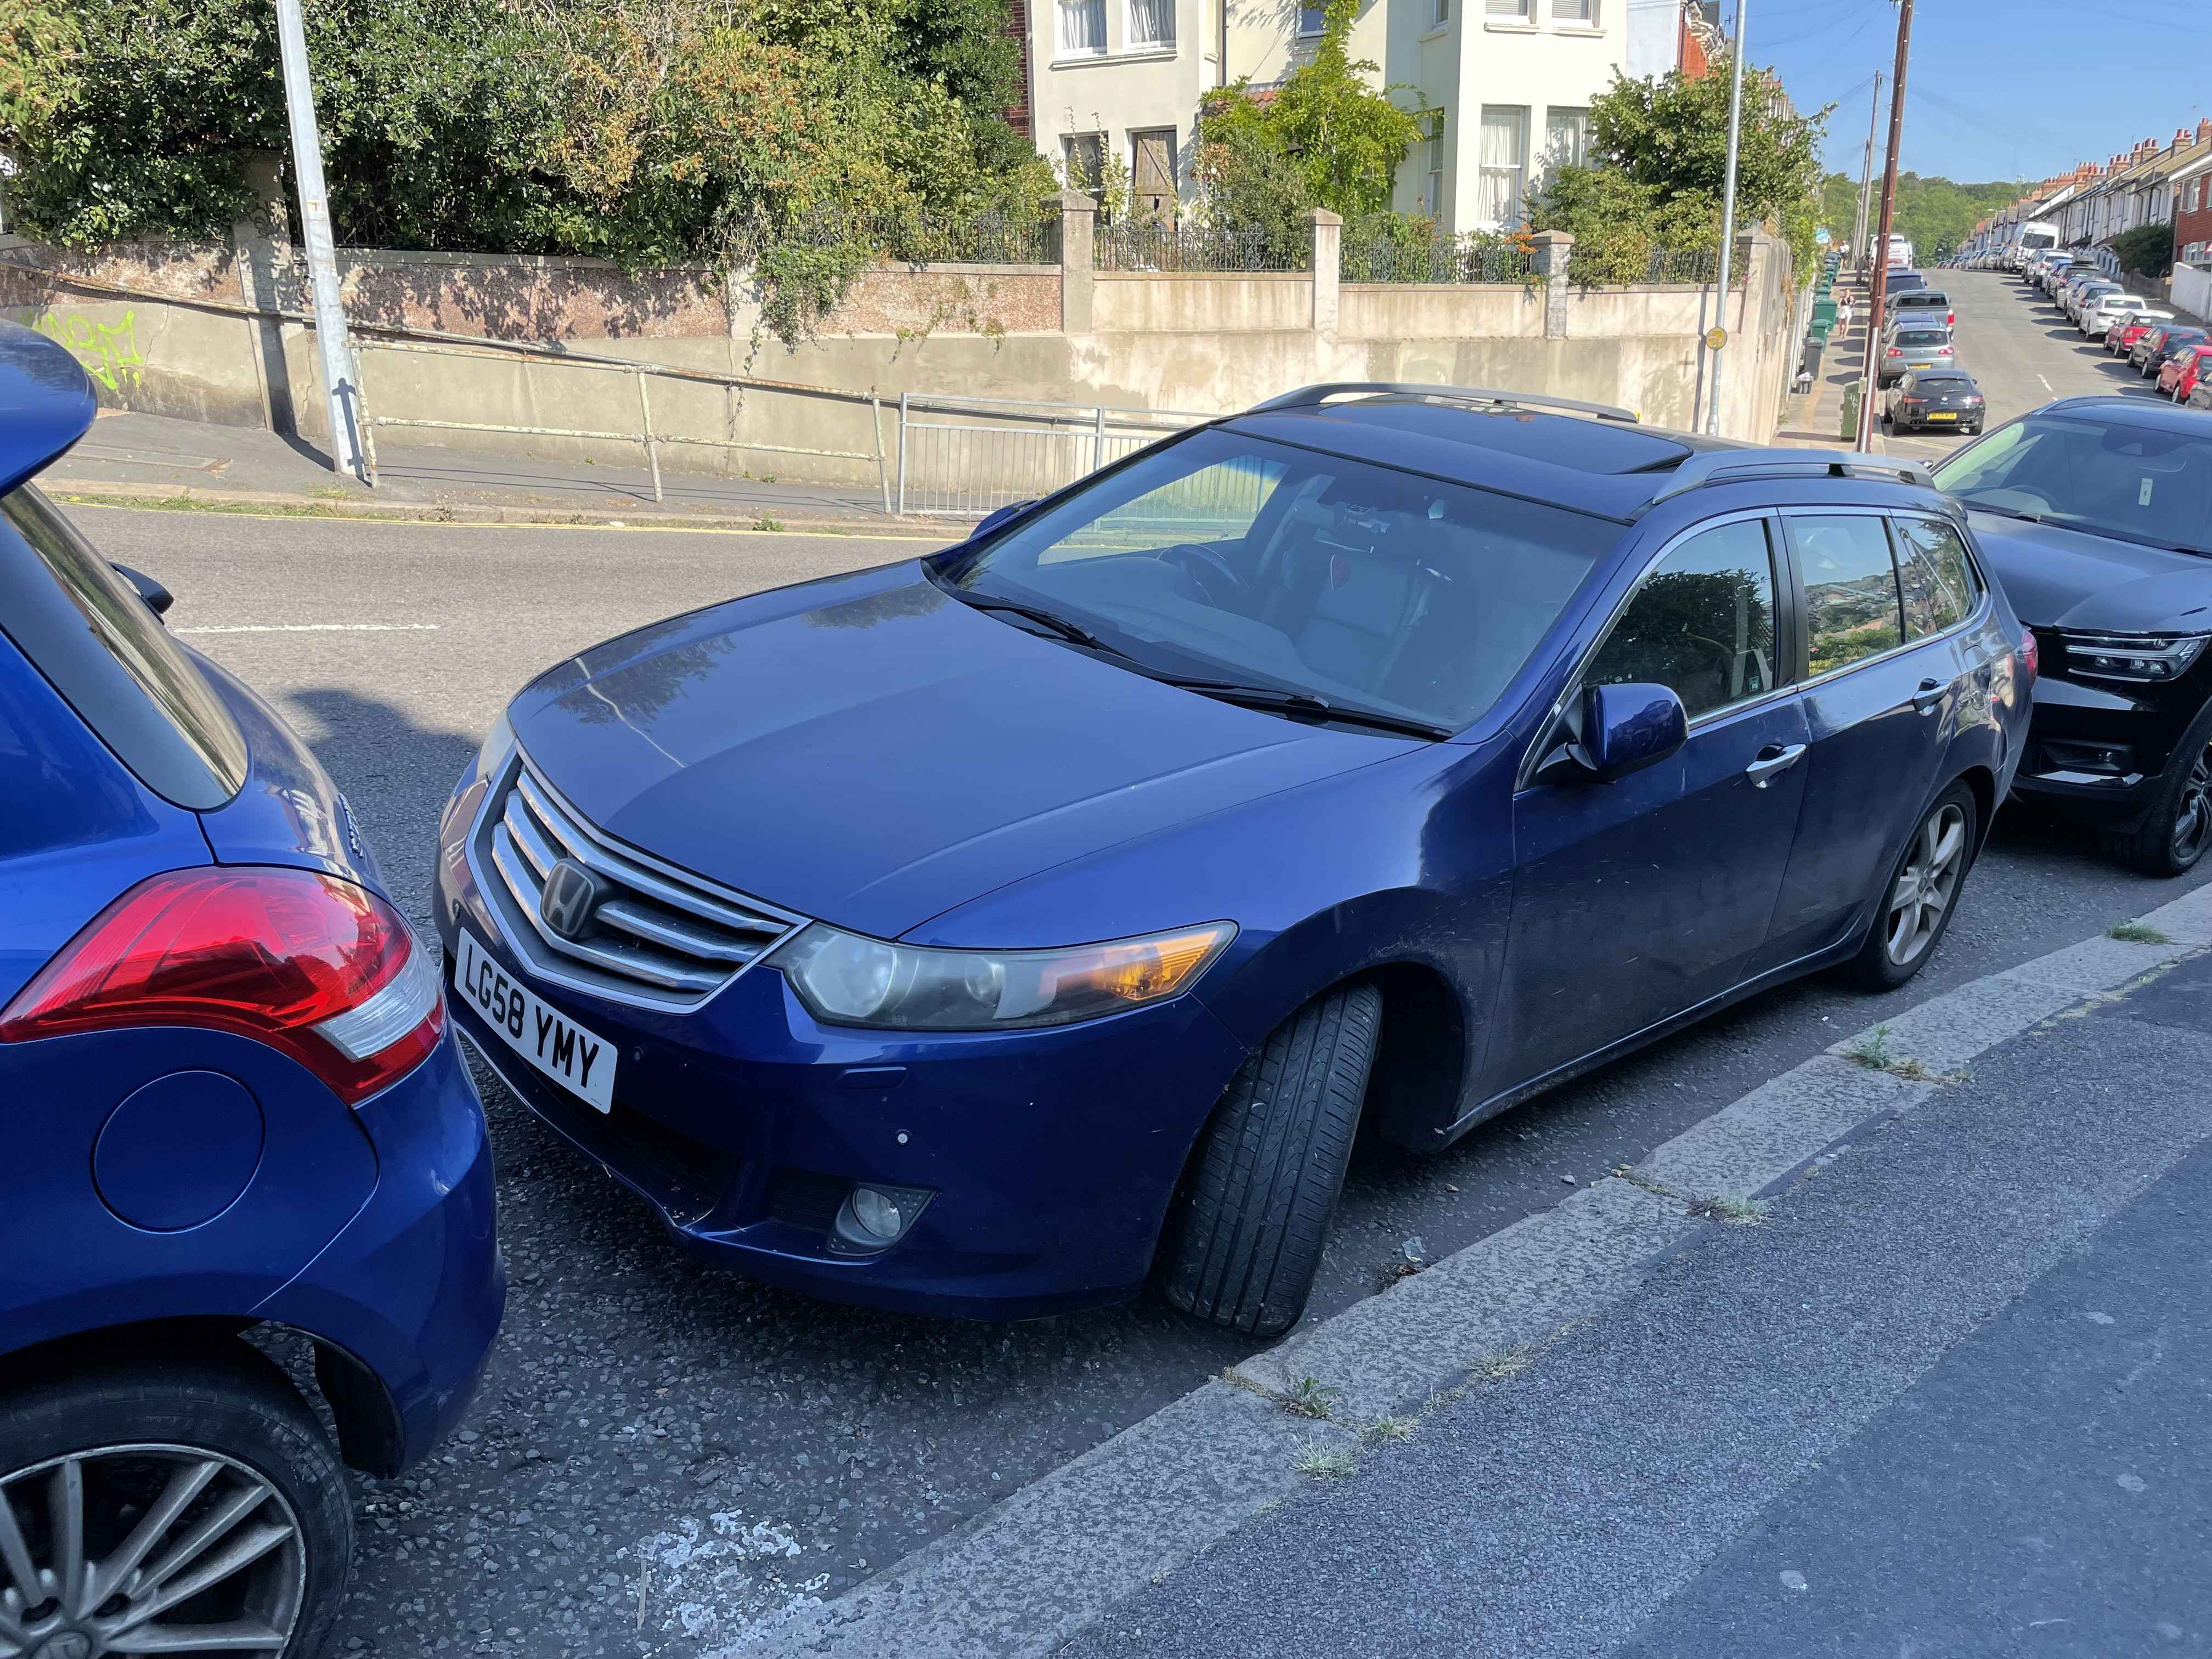 Photograph of LG58 YMY - a Blue Honda Accord parked in Hollingdean by a non-resident who uses the local area as part of their Brighton commute. The third of four photographs supplied by the residents of Hollingdean.